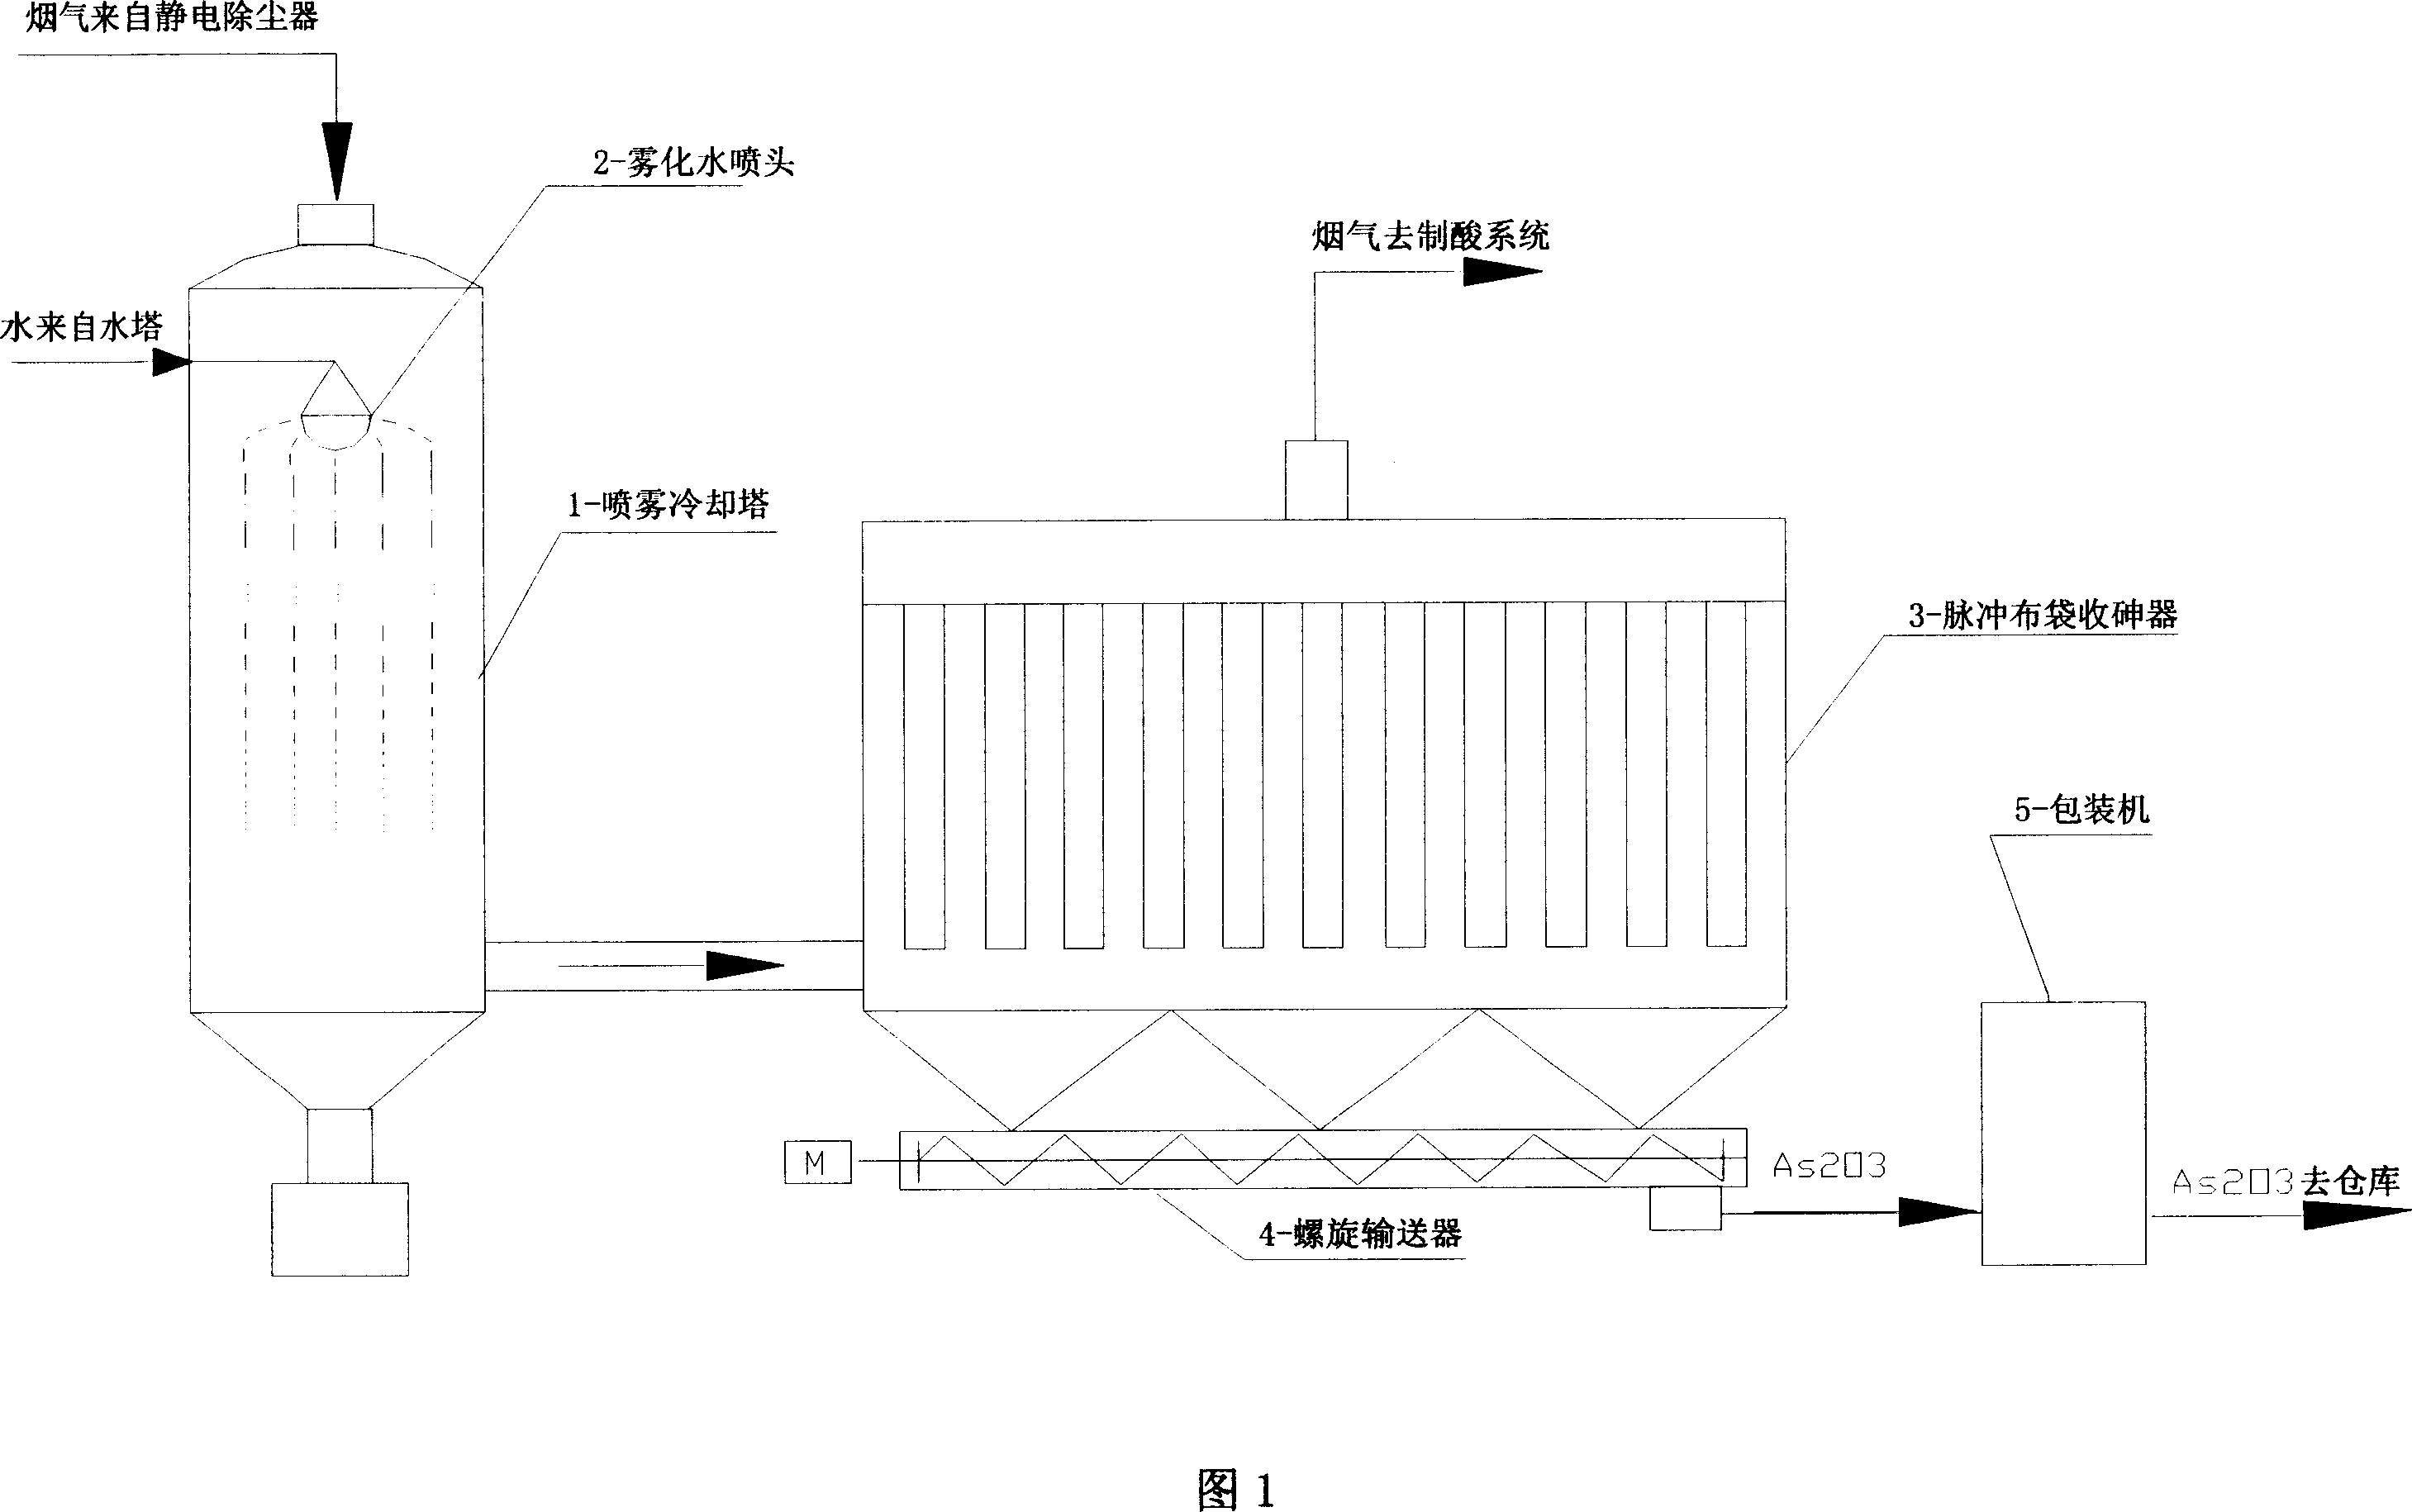 Process for purifying arsenic-containing mineral burned fume